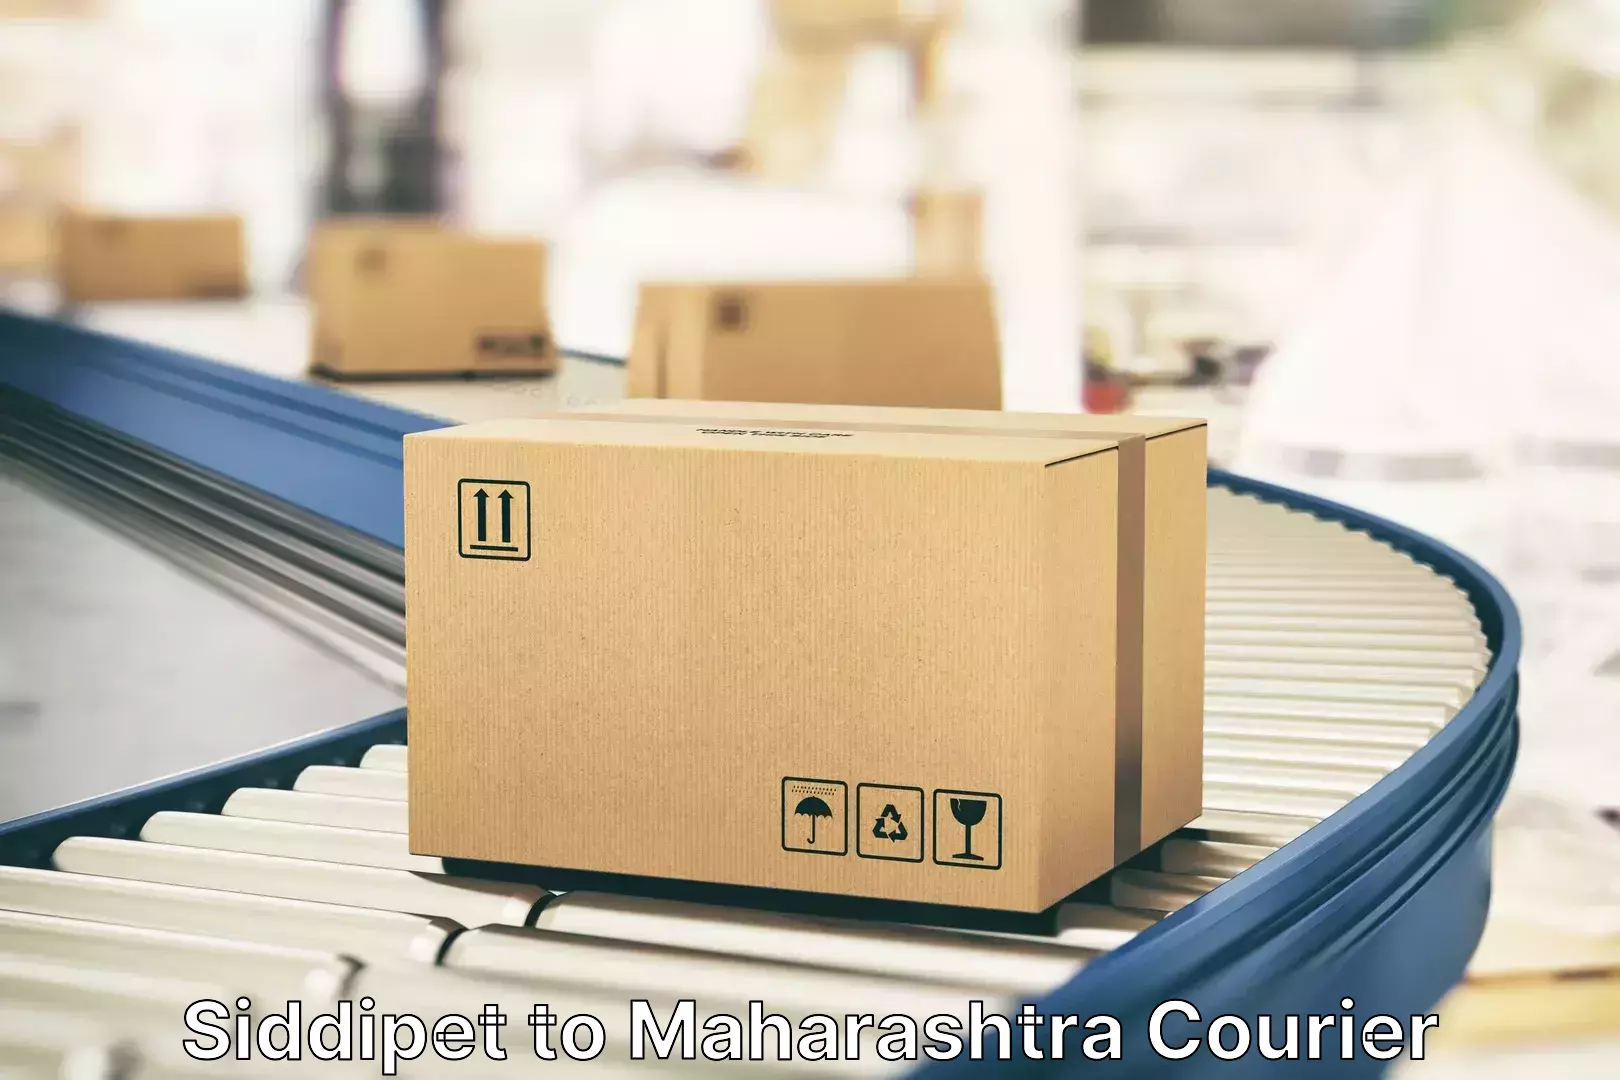 Hassle-free luggage shipping Siddipet to Nagpur